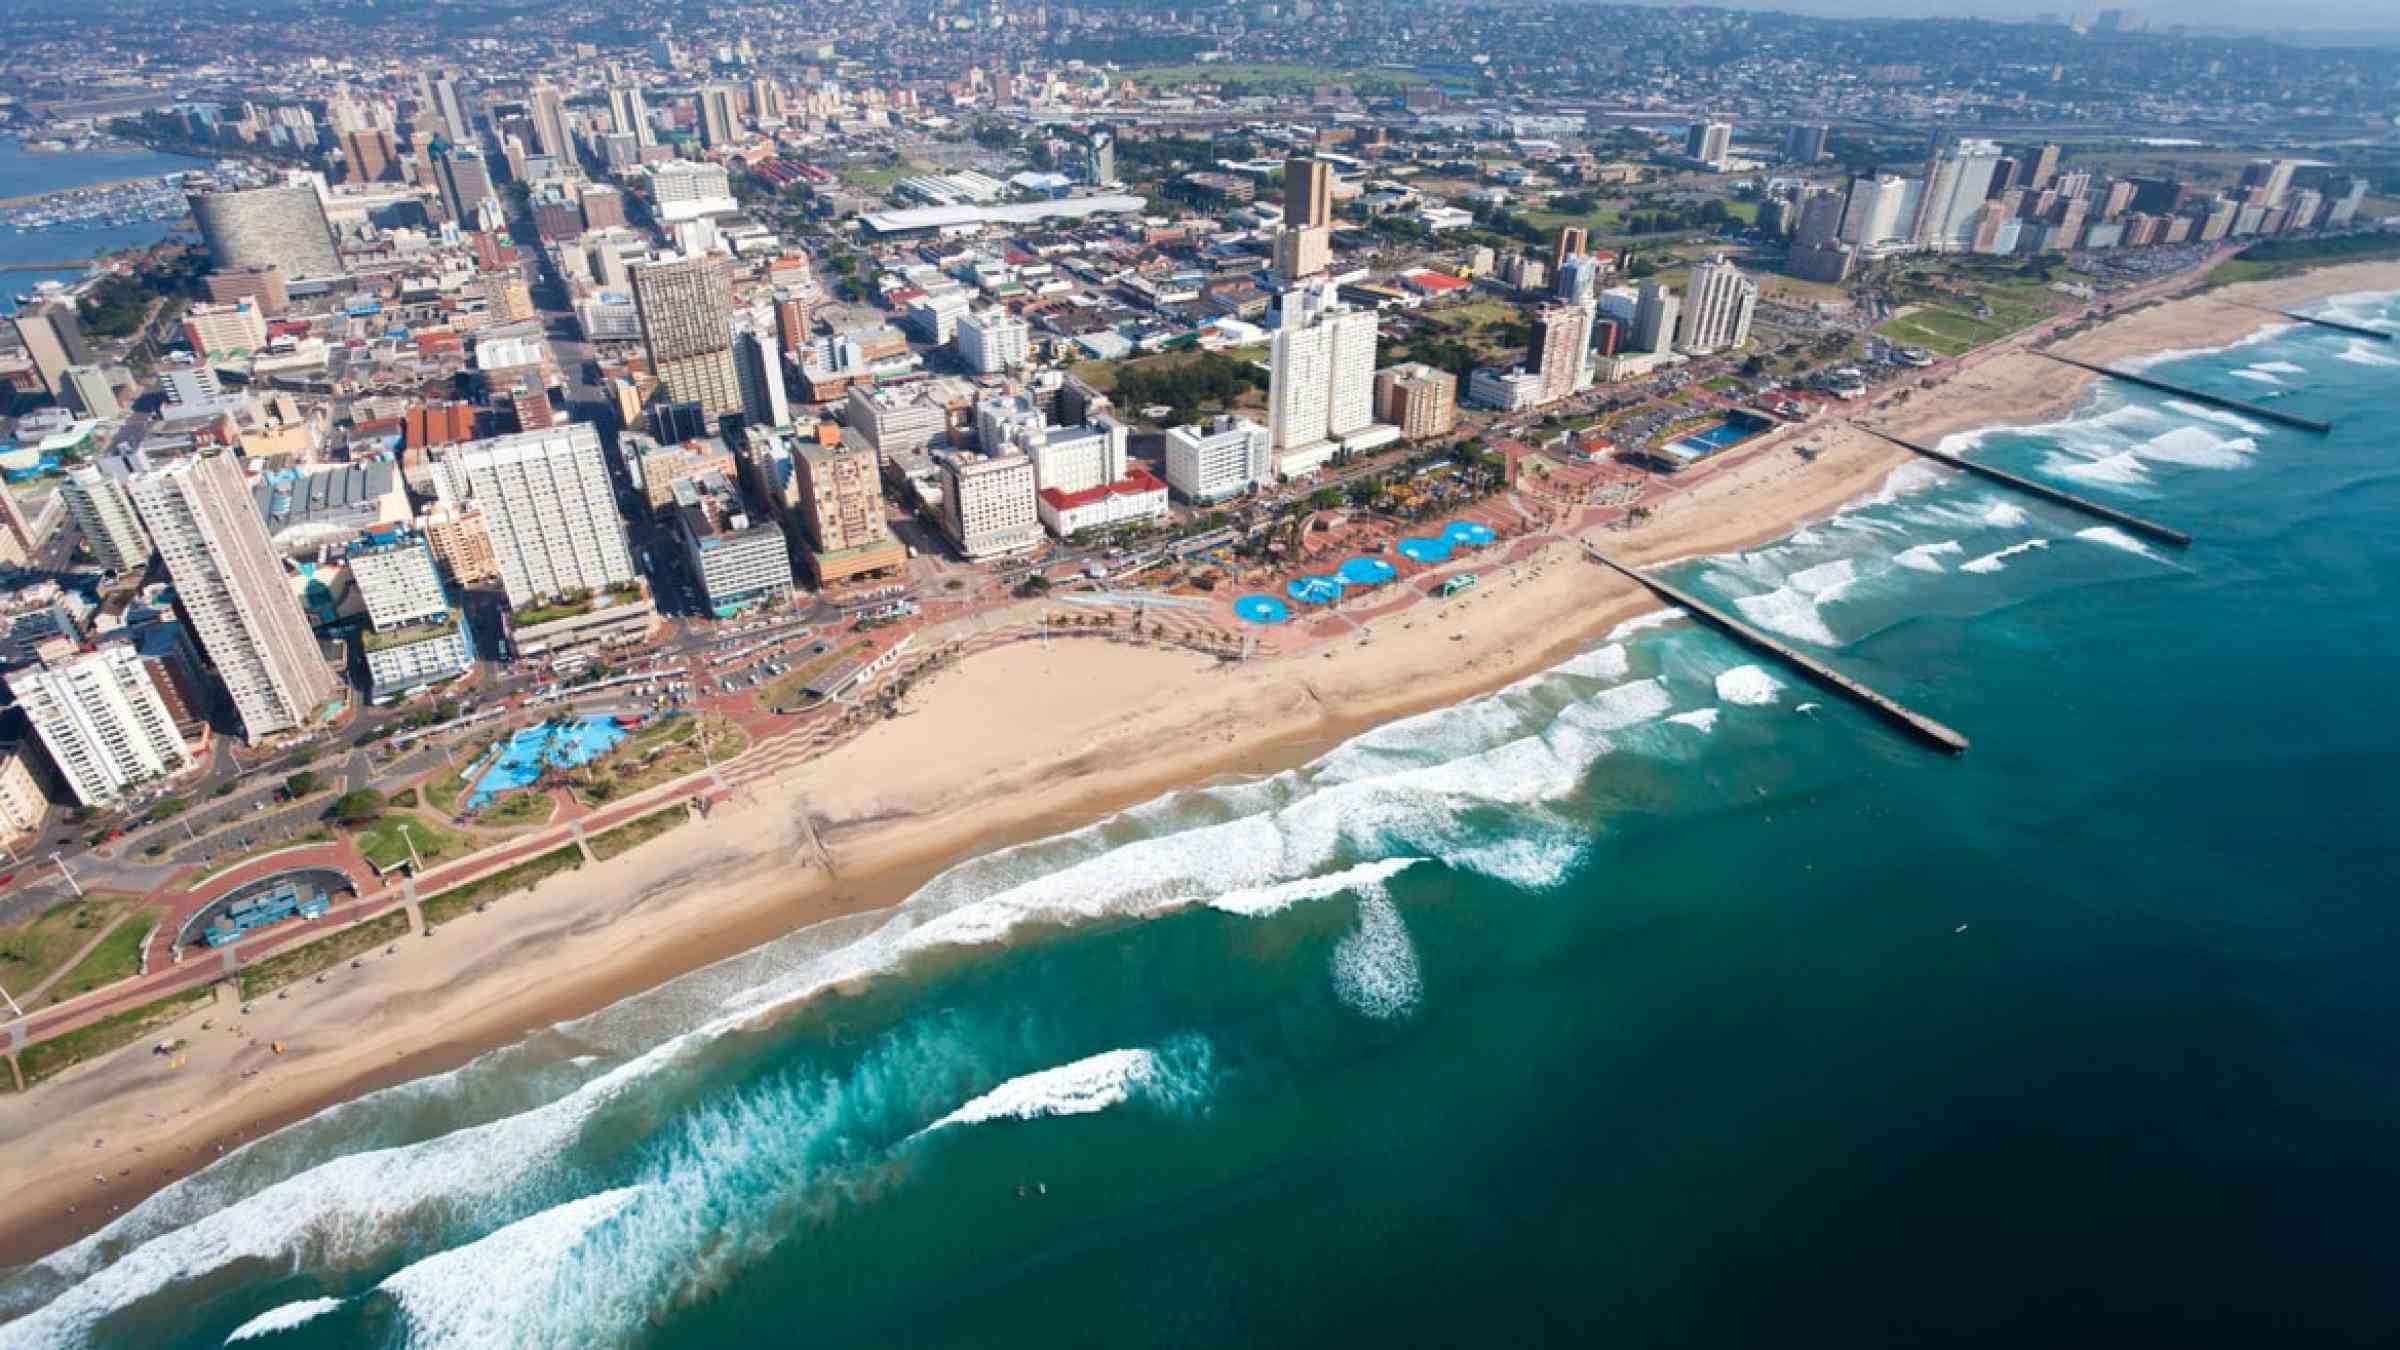 Aerial view of the Durban city coast